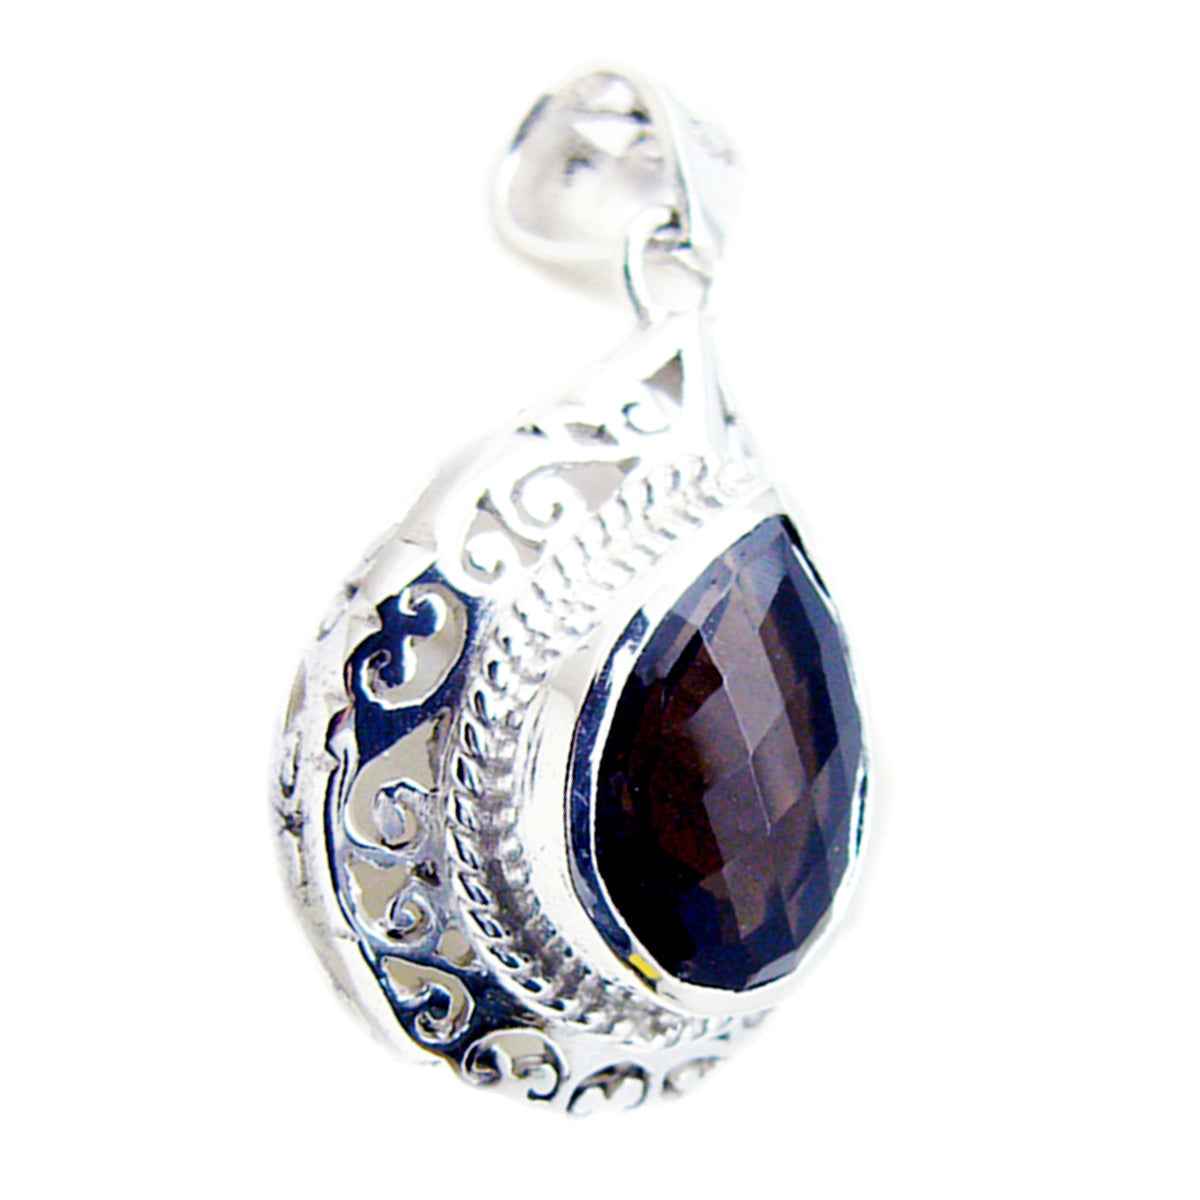 Riyo Exquisite Gems Pear Checker Brown Smoky Quartz Solid Silver Pendant Gift For Easter Sunday